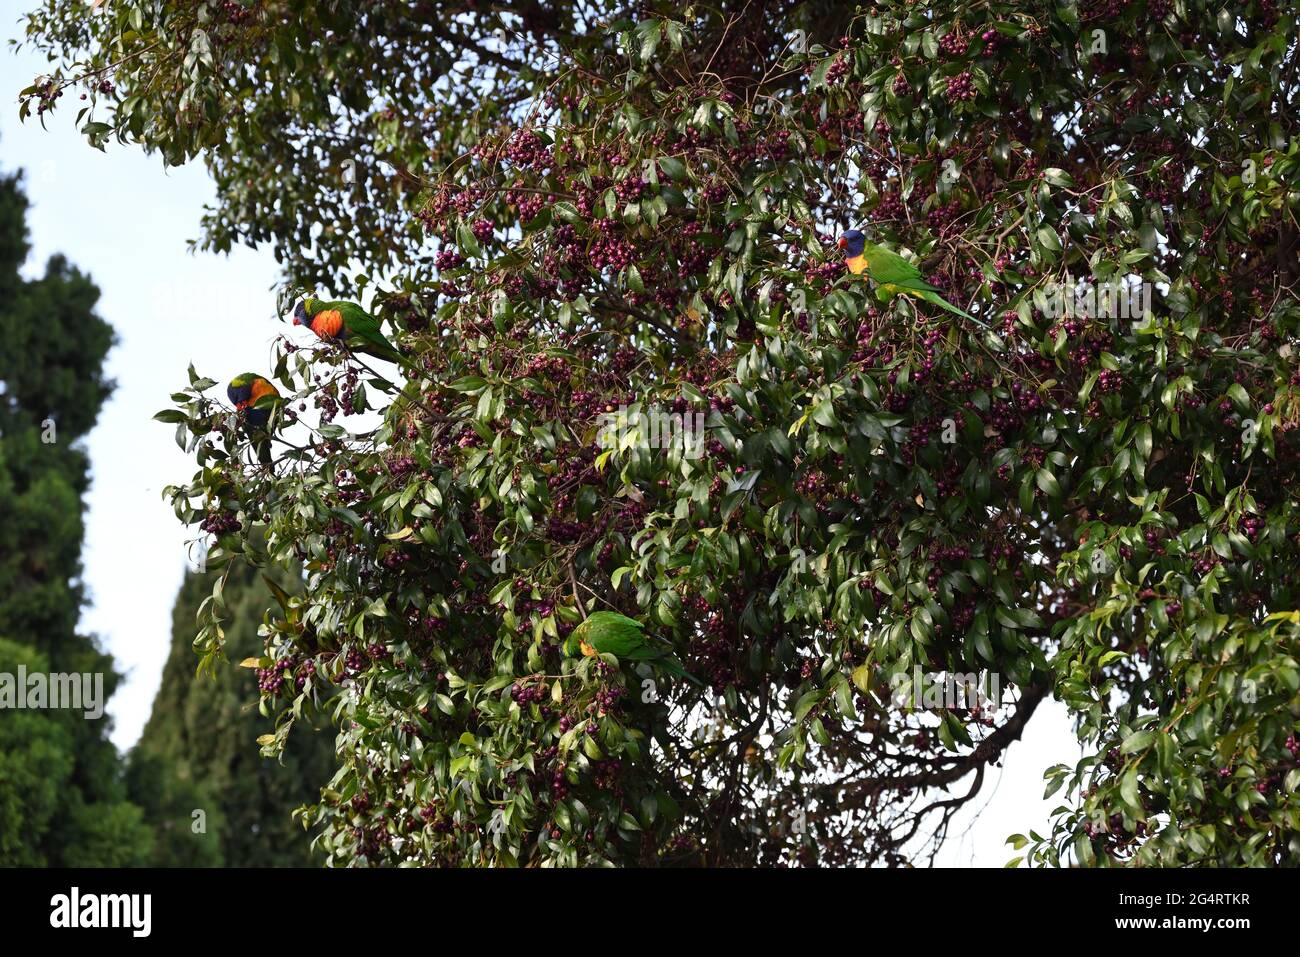 Four rainbow lorikeets in a tree filled with berries Stock Photo